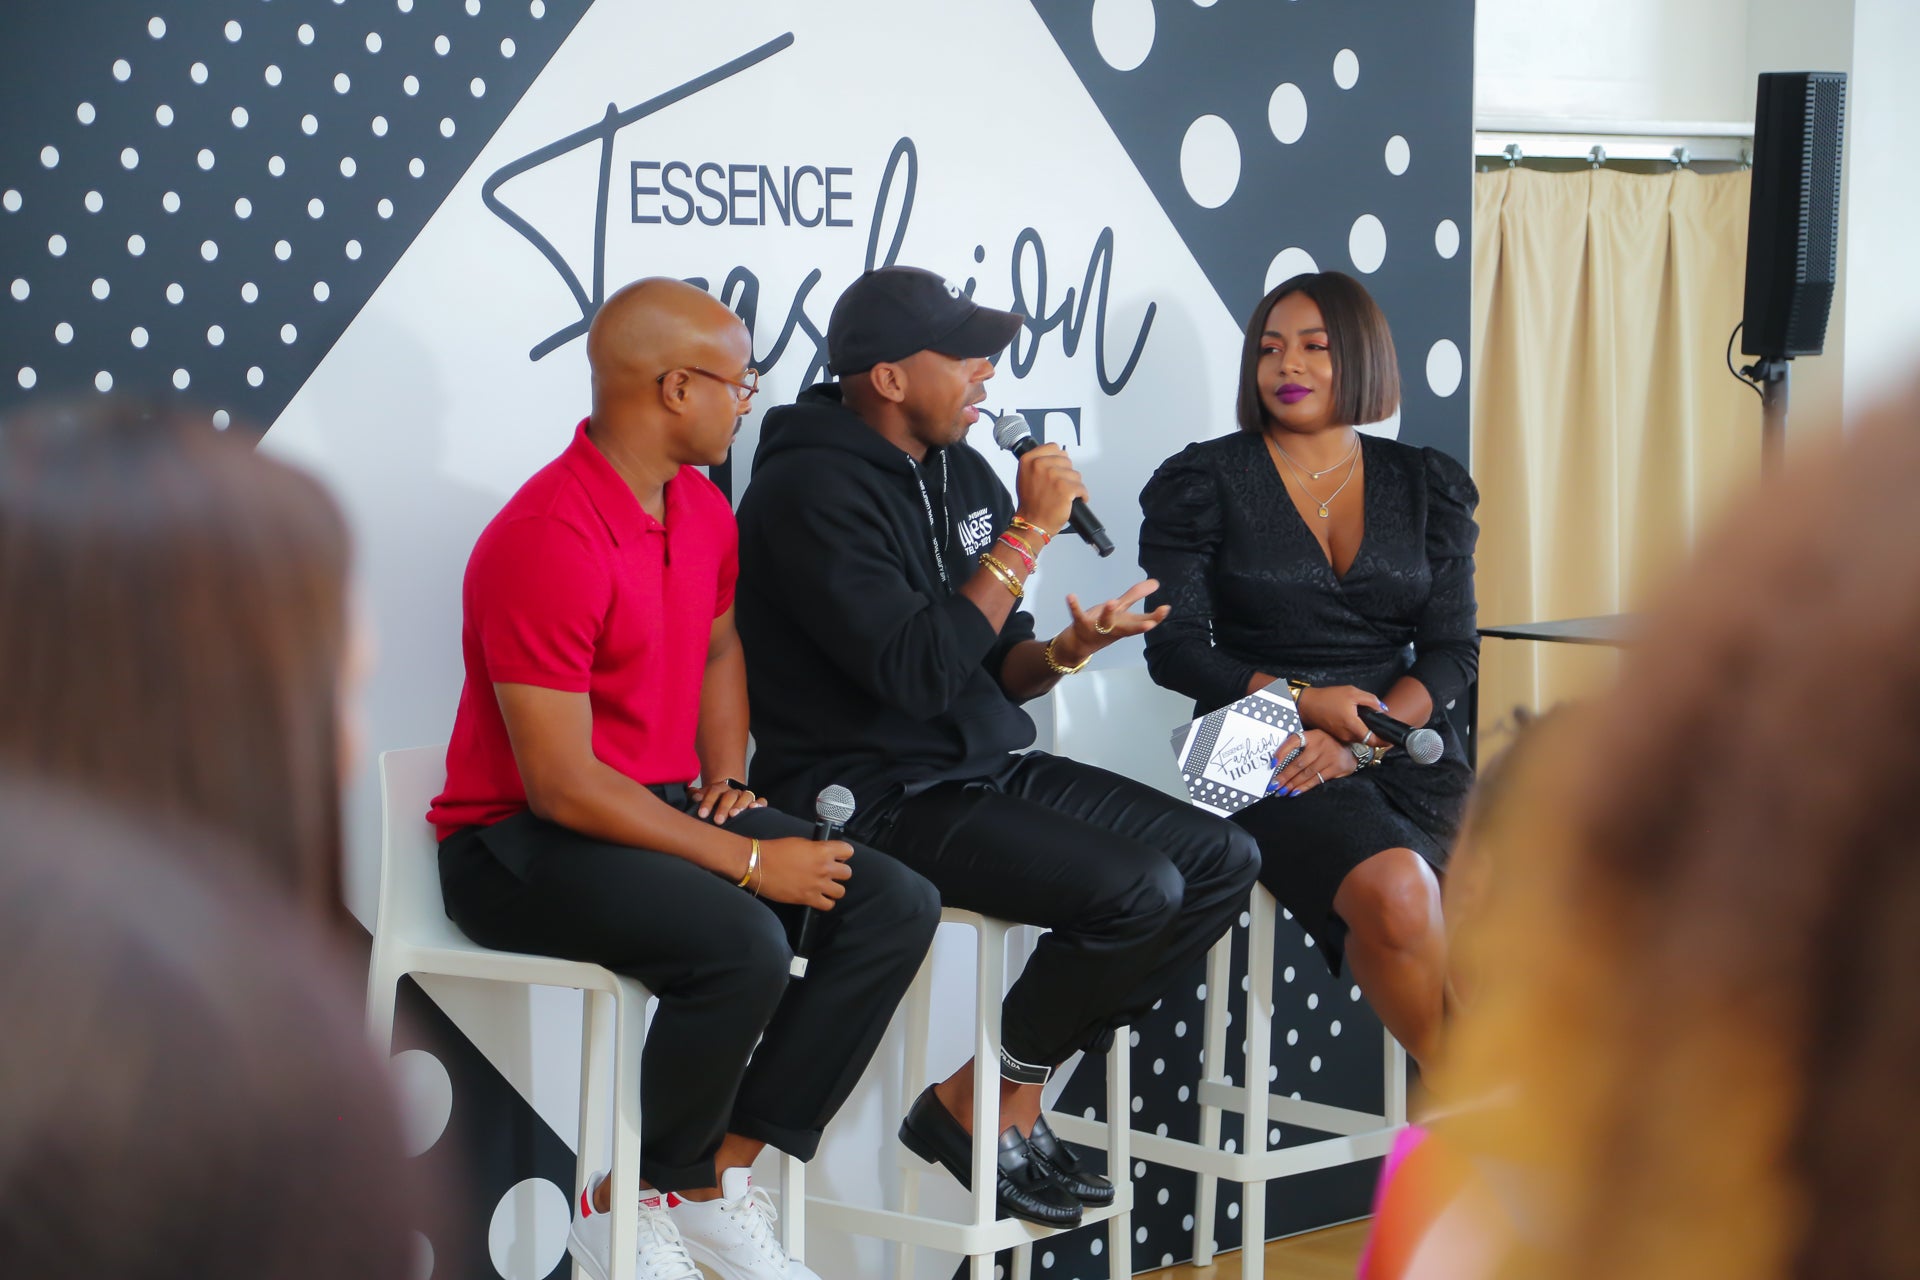 ESSENCE Fashion House NYC: Jason Bolden And Adair Curtis Discuss The Struggles Of Being A Black Entrepreneur